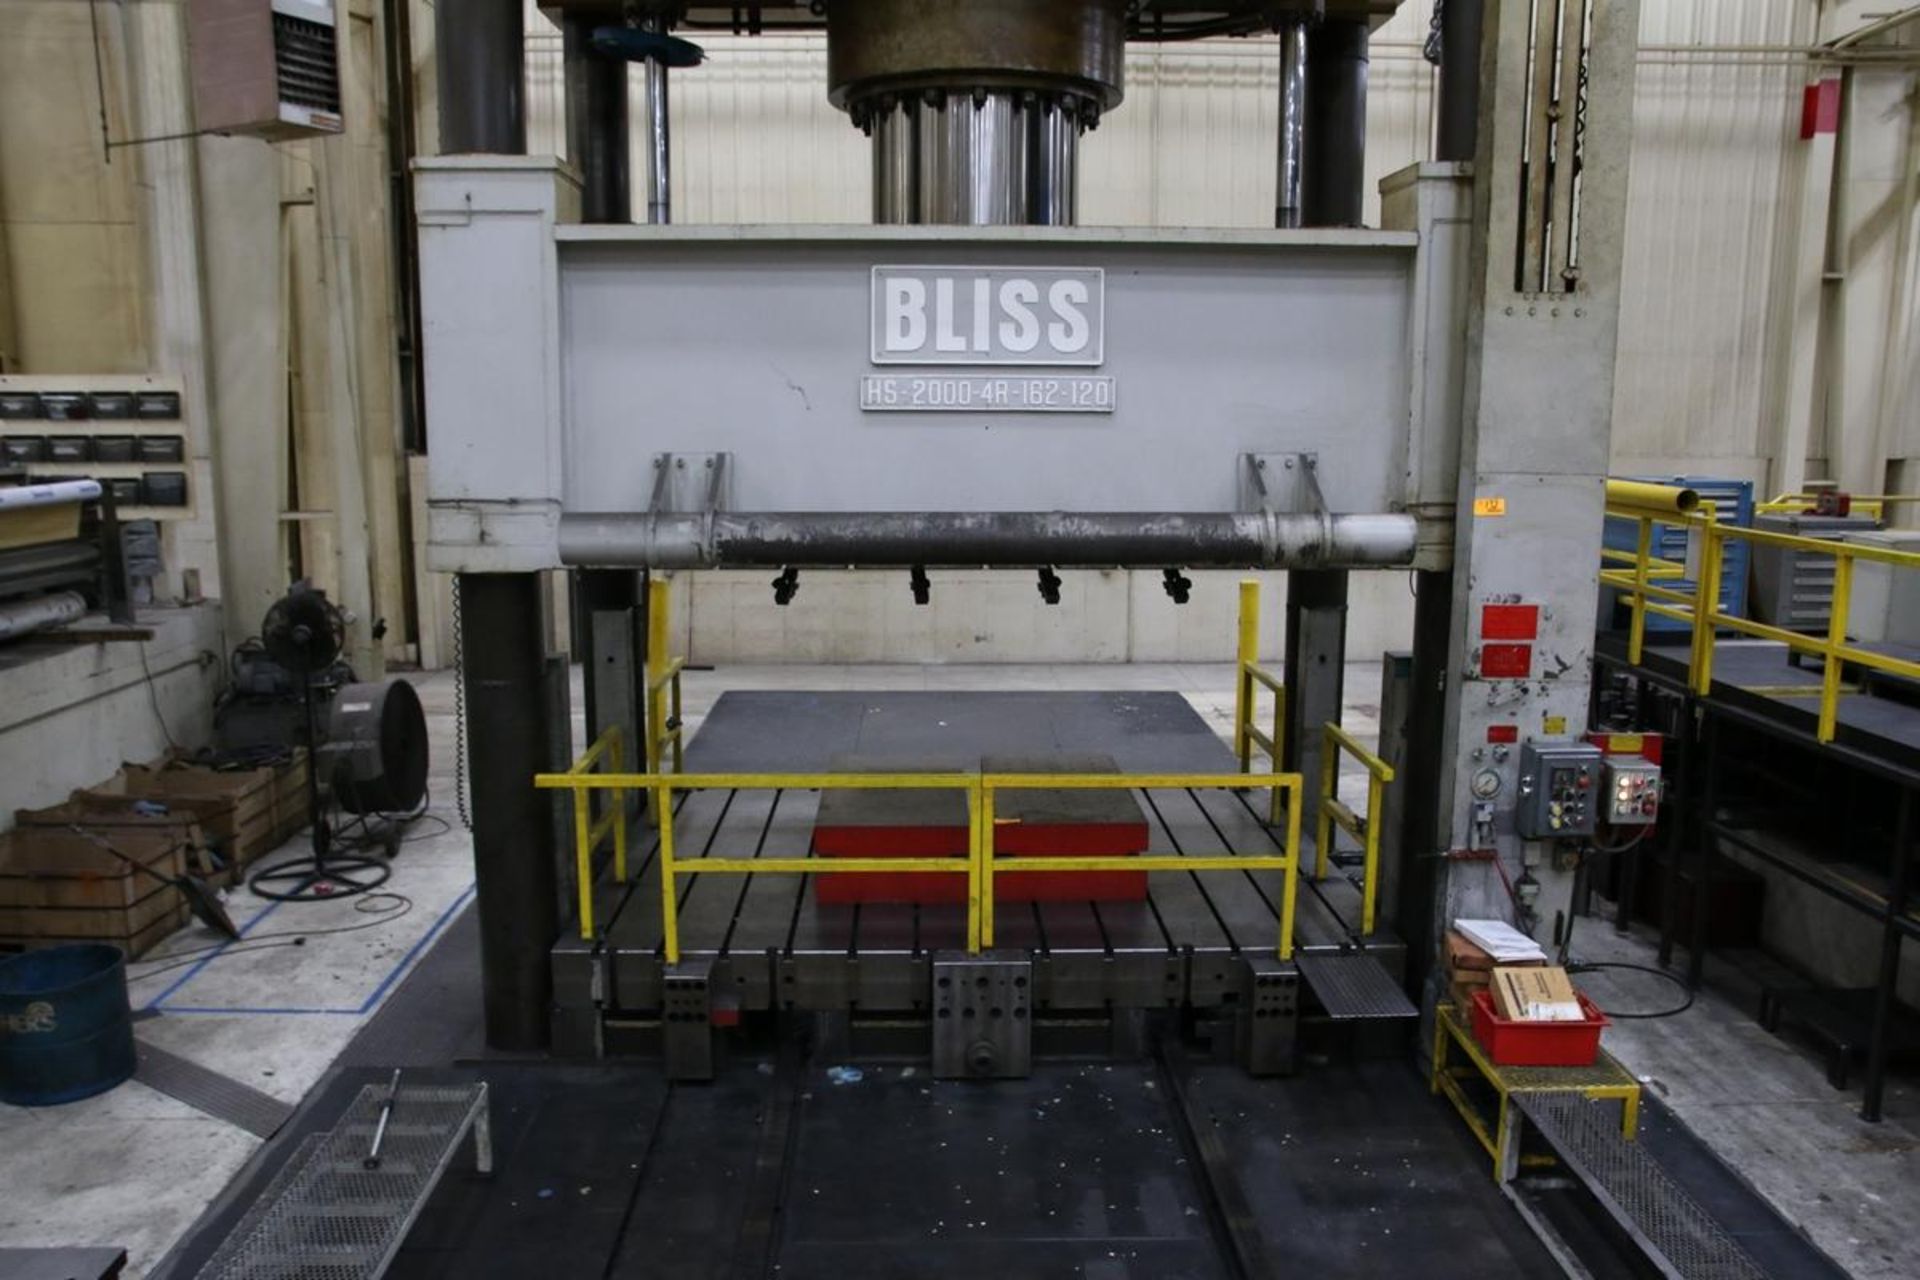 1967 Bliss HS-2000 4R-162-120 4-Post Hydraulic Try Out Press - Image 5 of 22